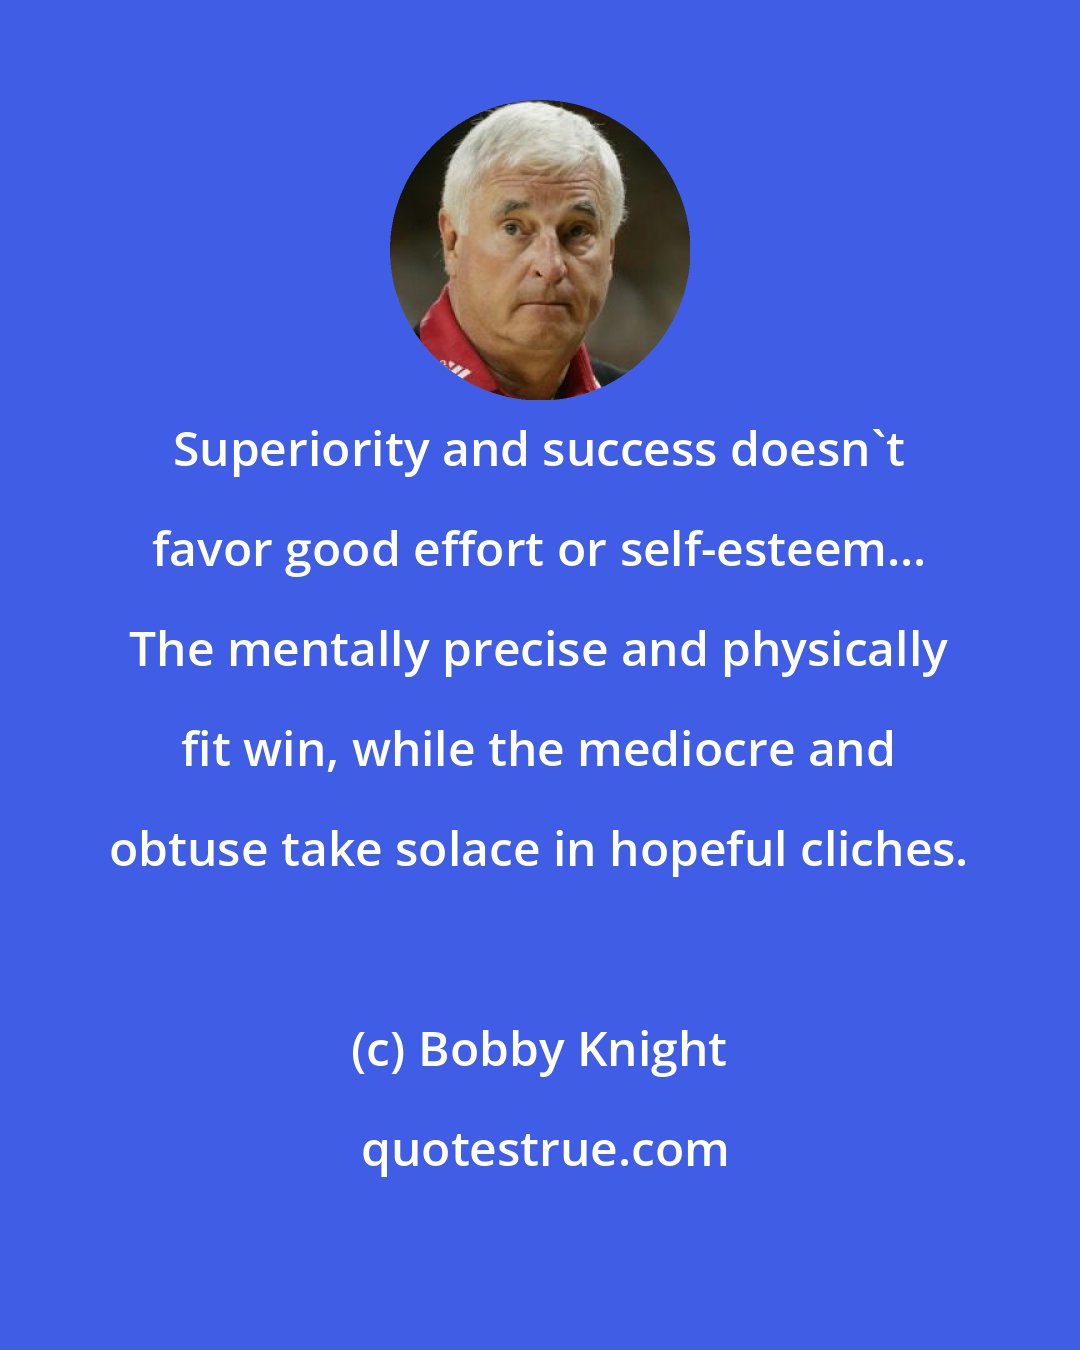 Bobby Knight: Superiority and success doesn't favor good effort or self-esteem... The mentally precise and physically fit win, while the mediocre and obtuse take solace in hopeful cliches.